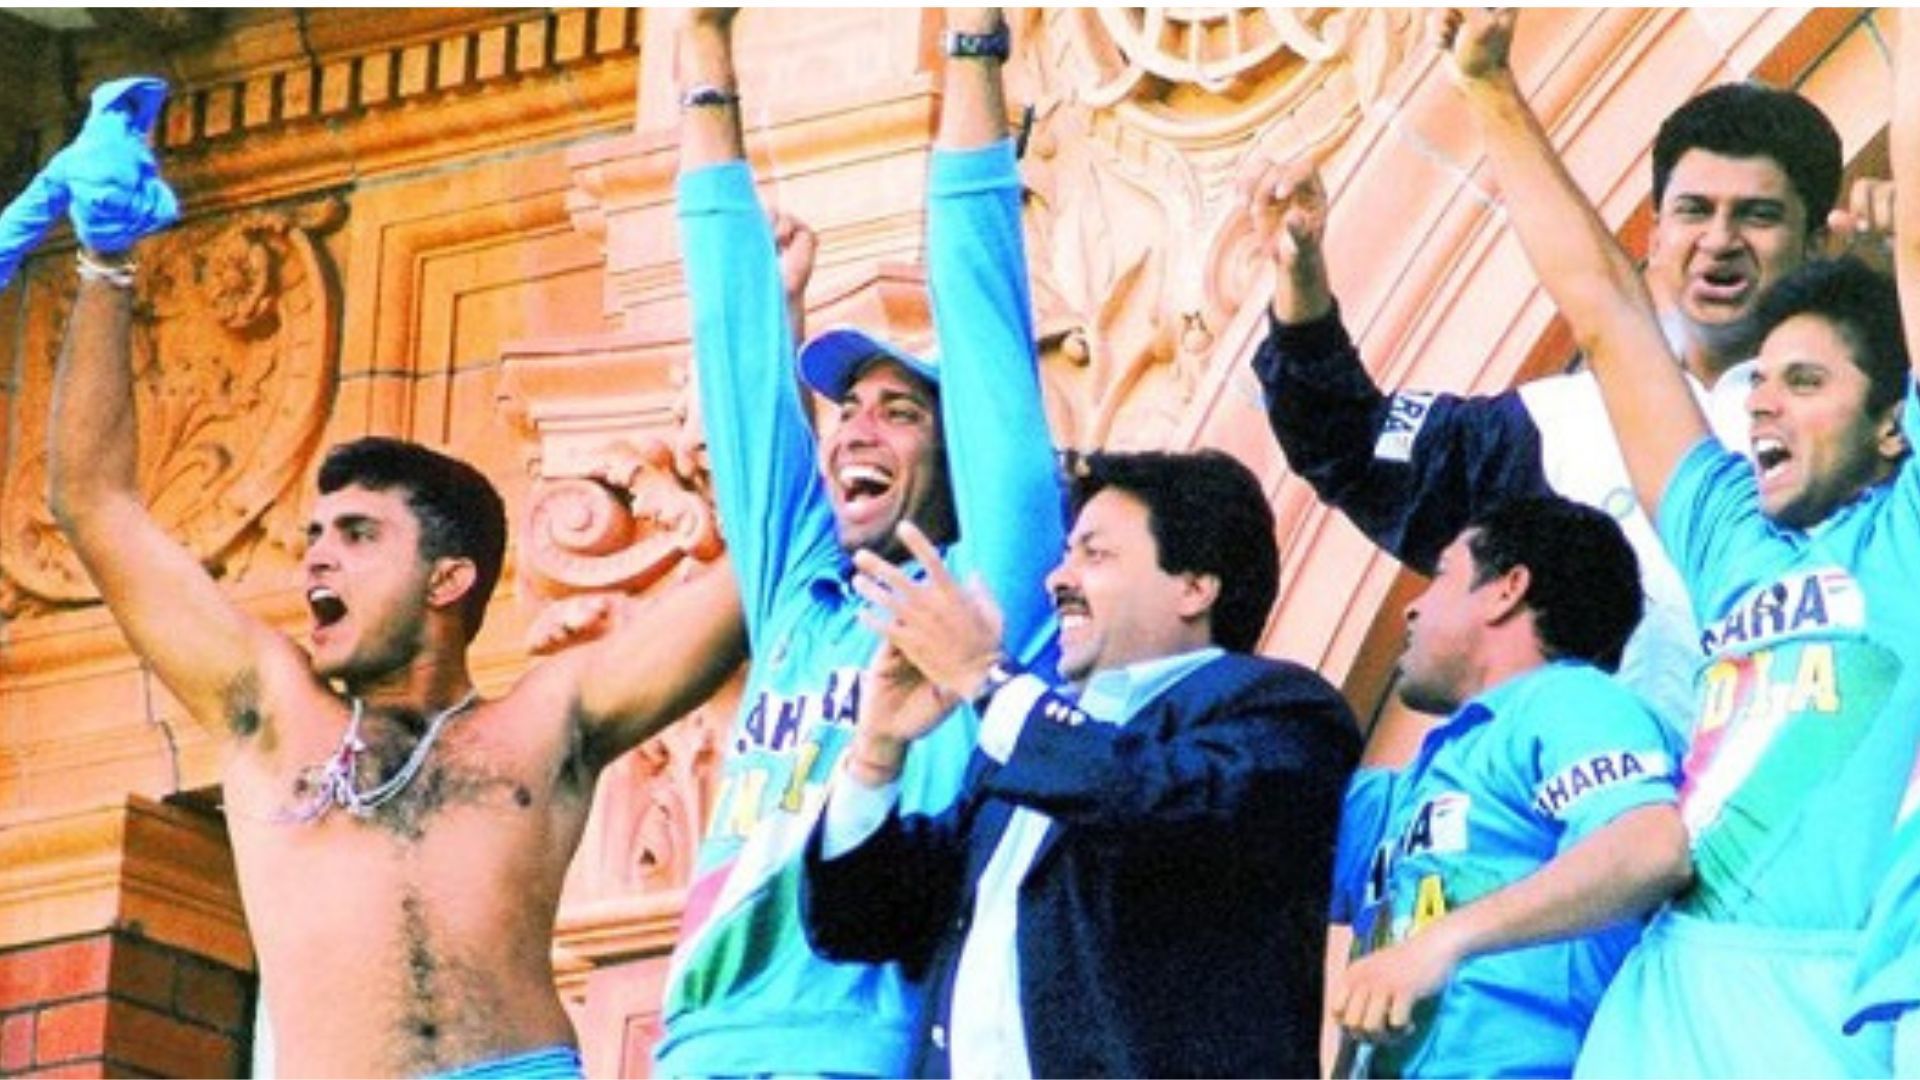 Sourav Ganguly was one of the most inspirational captains India has produced.